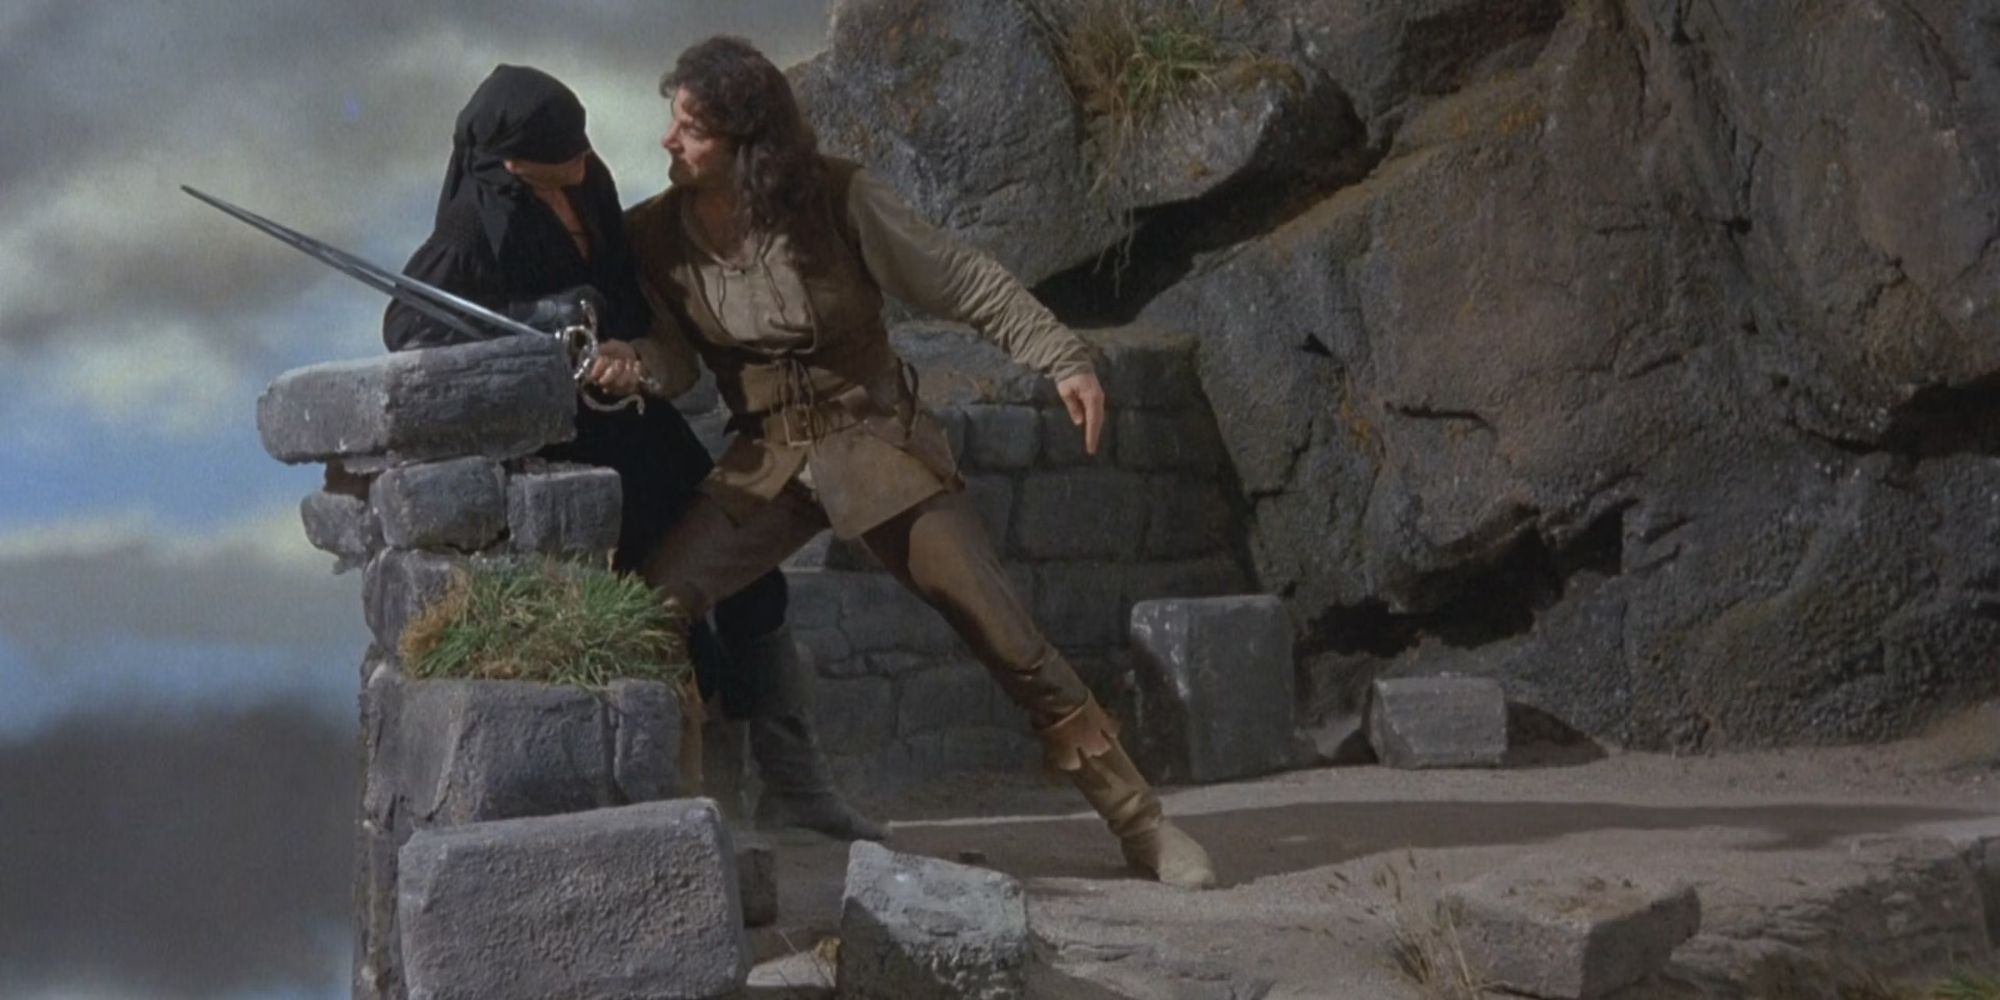 Inigo (Mandy Patinkin) corners Westley (Cary Elwes) during a duel in 'The Princess Bride'